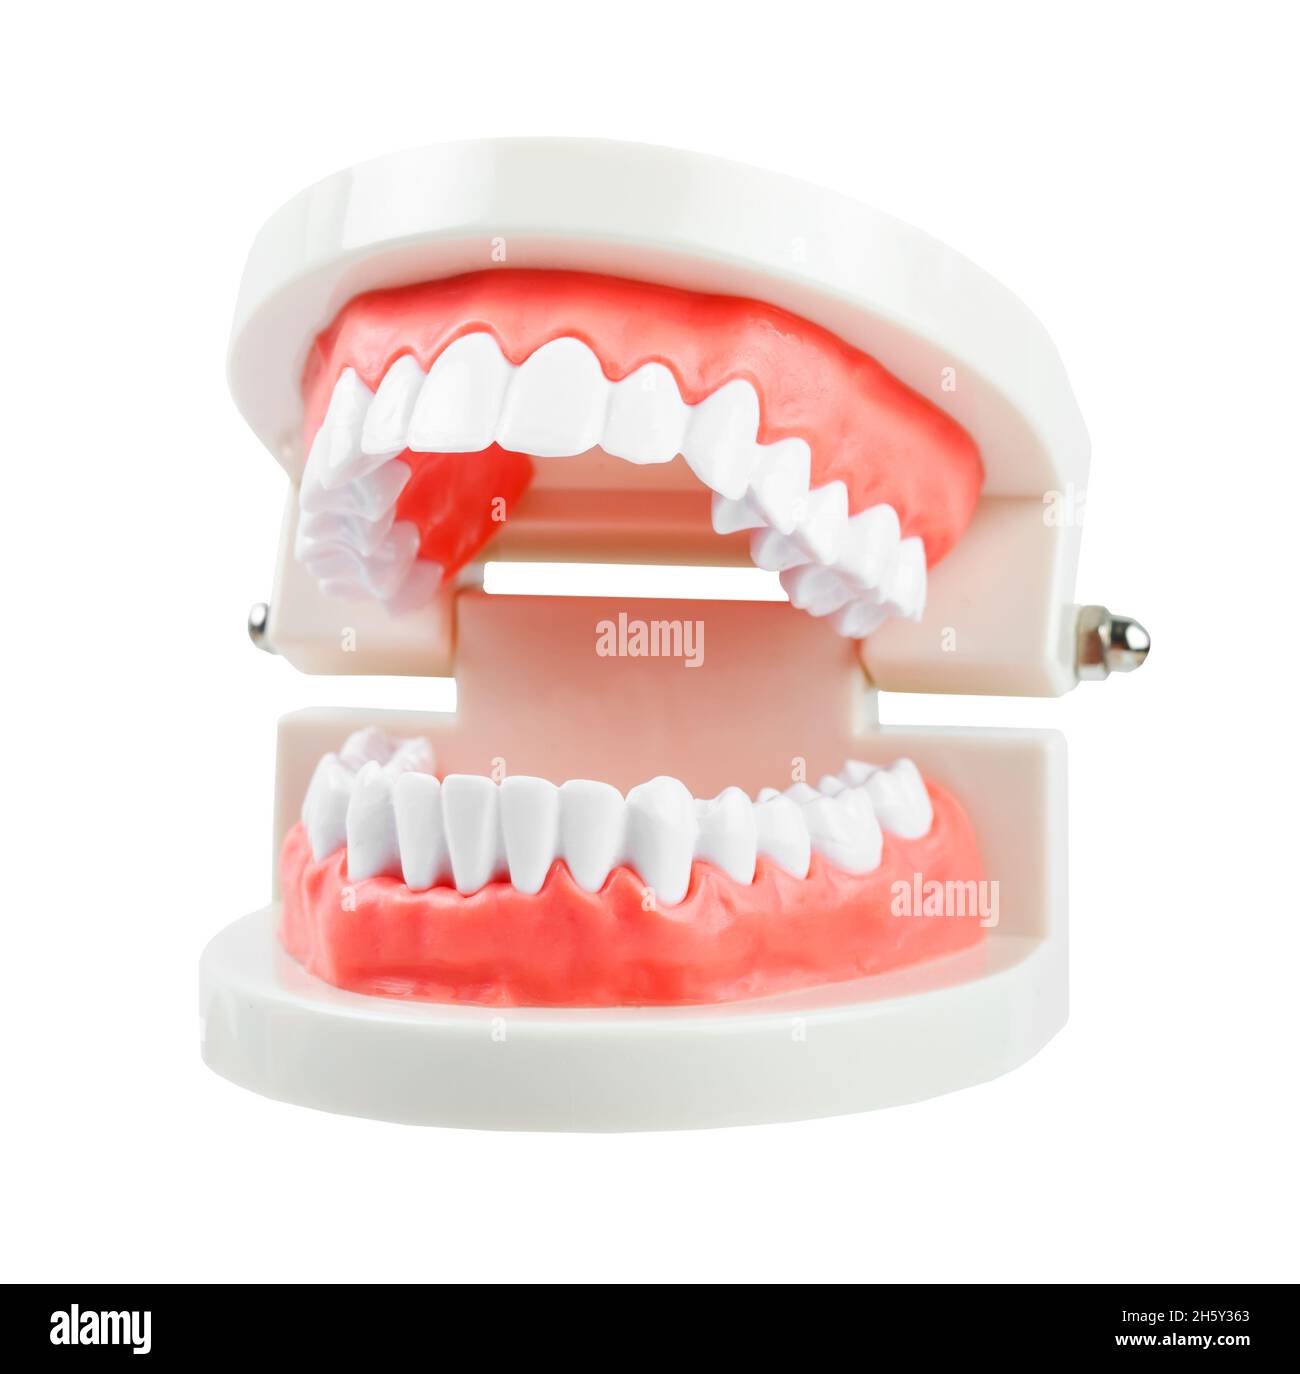 Teeth model isolated on white background, save clipping path. Stock Photo